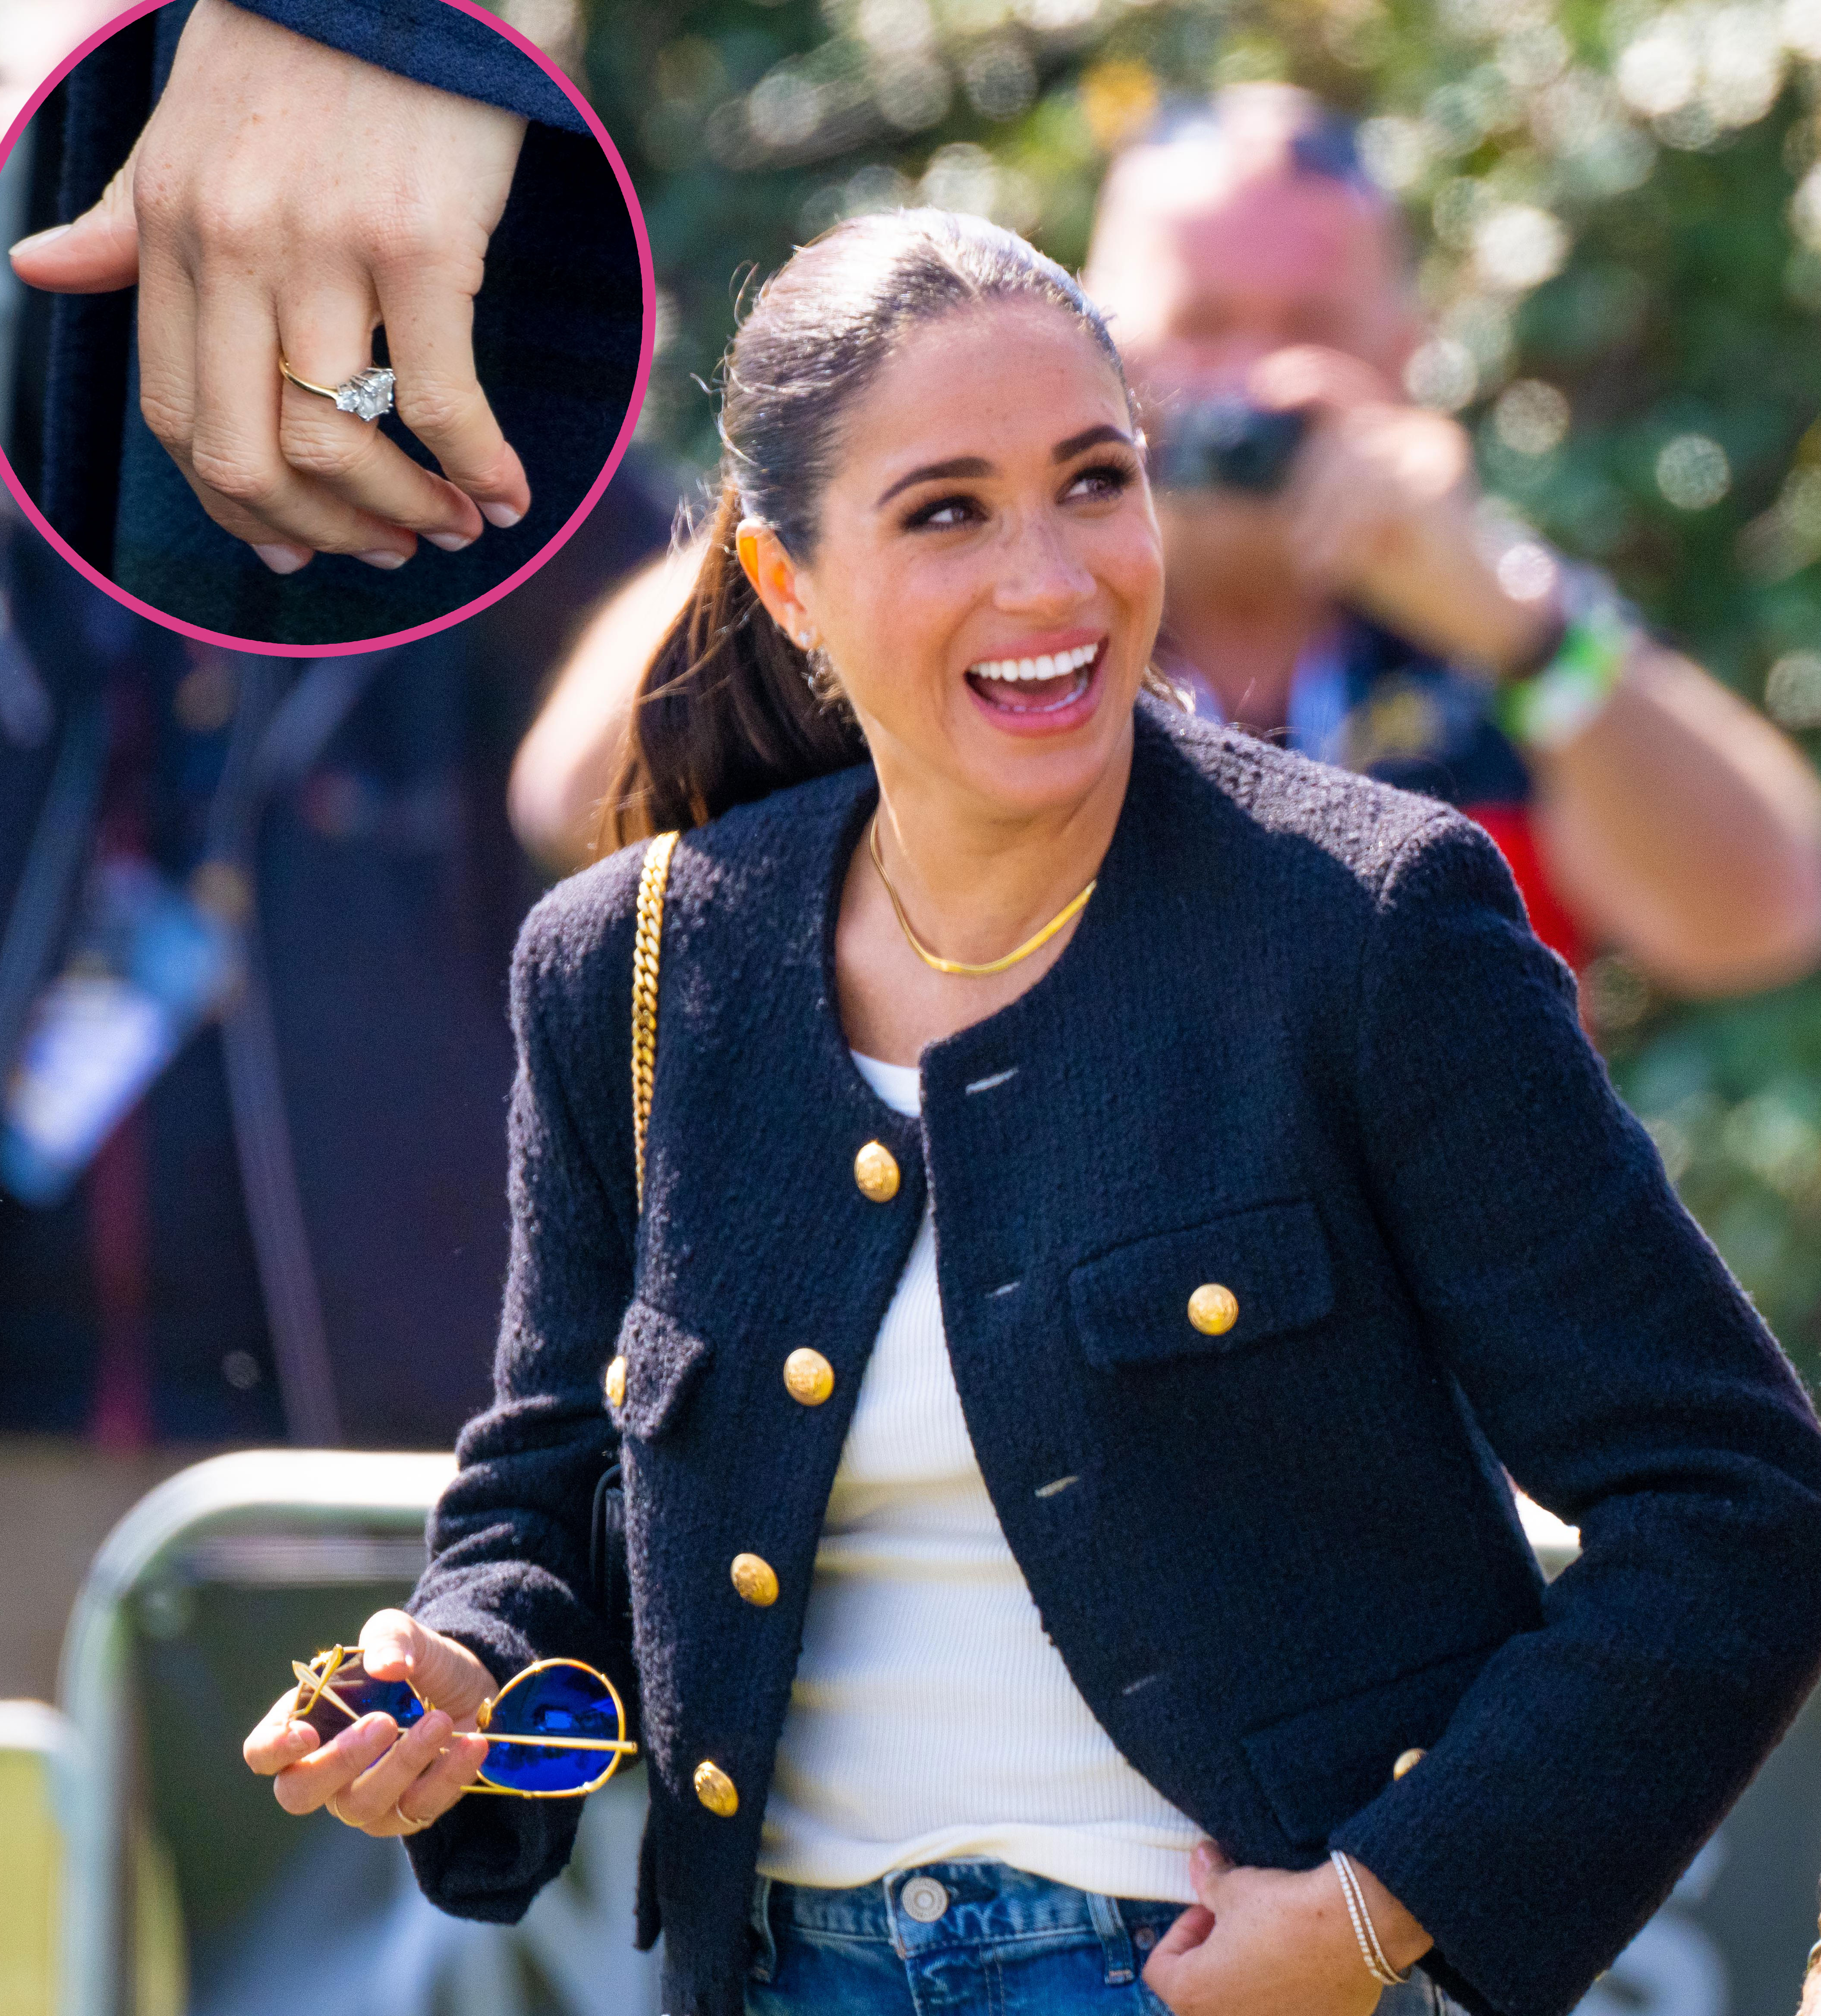 Photos of Meghan Markle's Engagement Ring